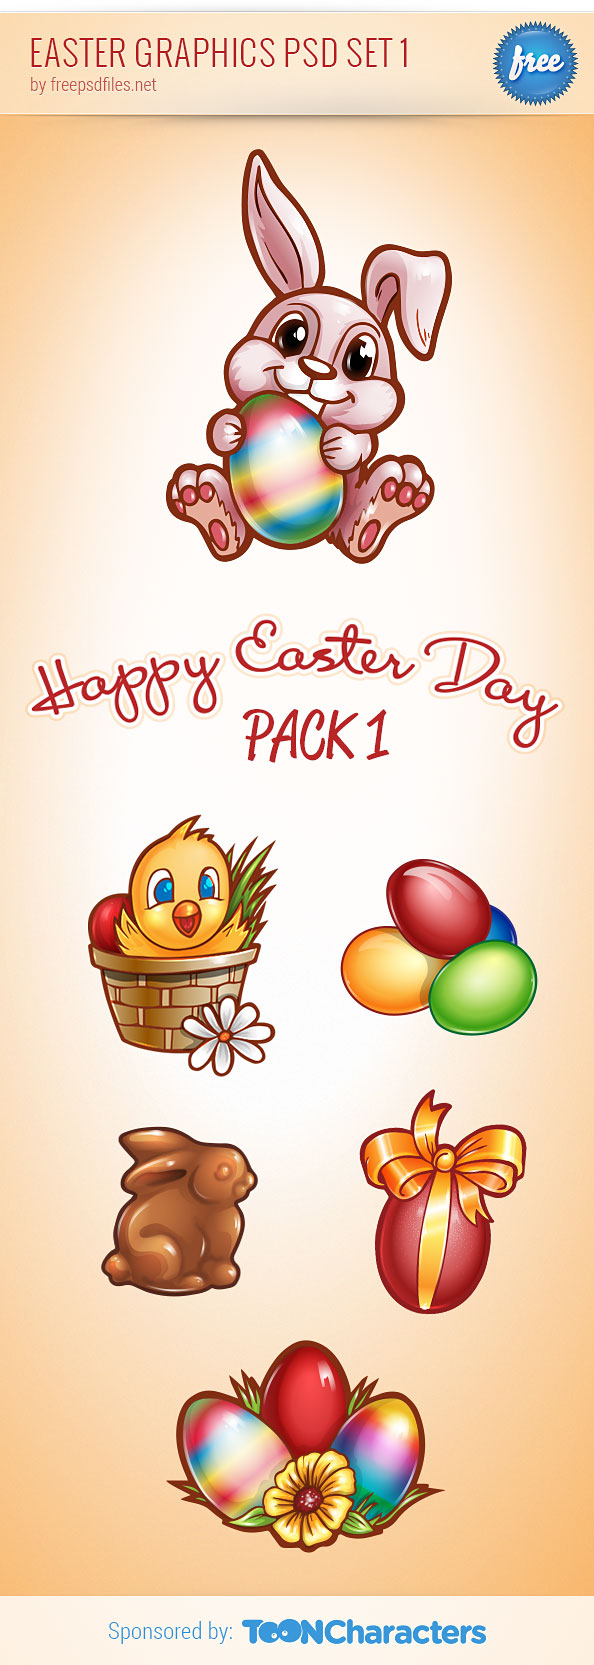 Easter Graphics PSD Set 1